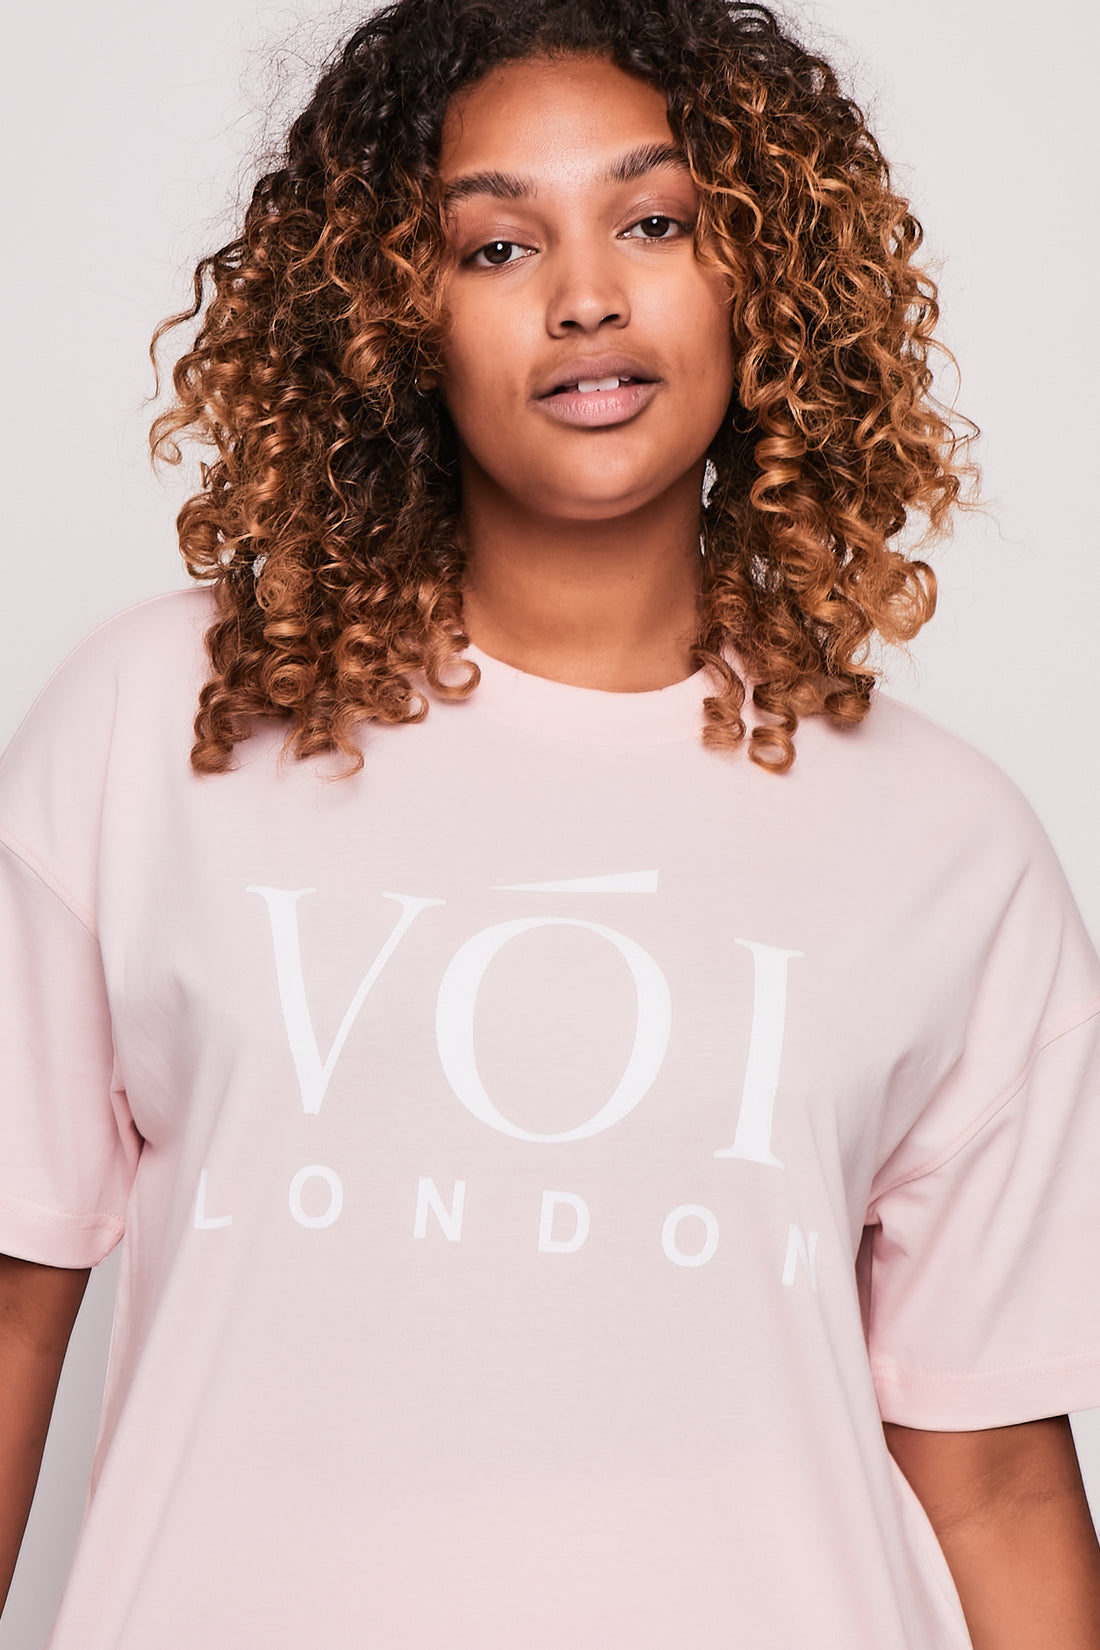 Burnt Oak Co-ord Tee and Short - Powder Pink